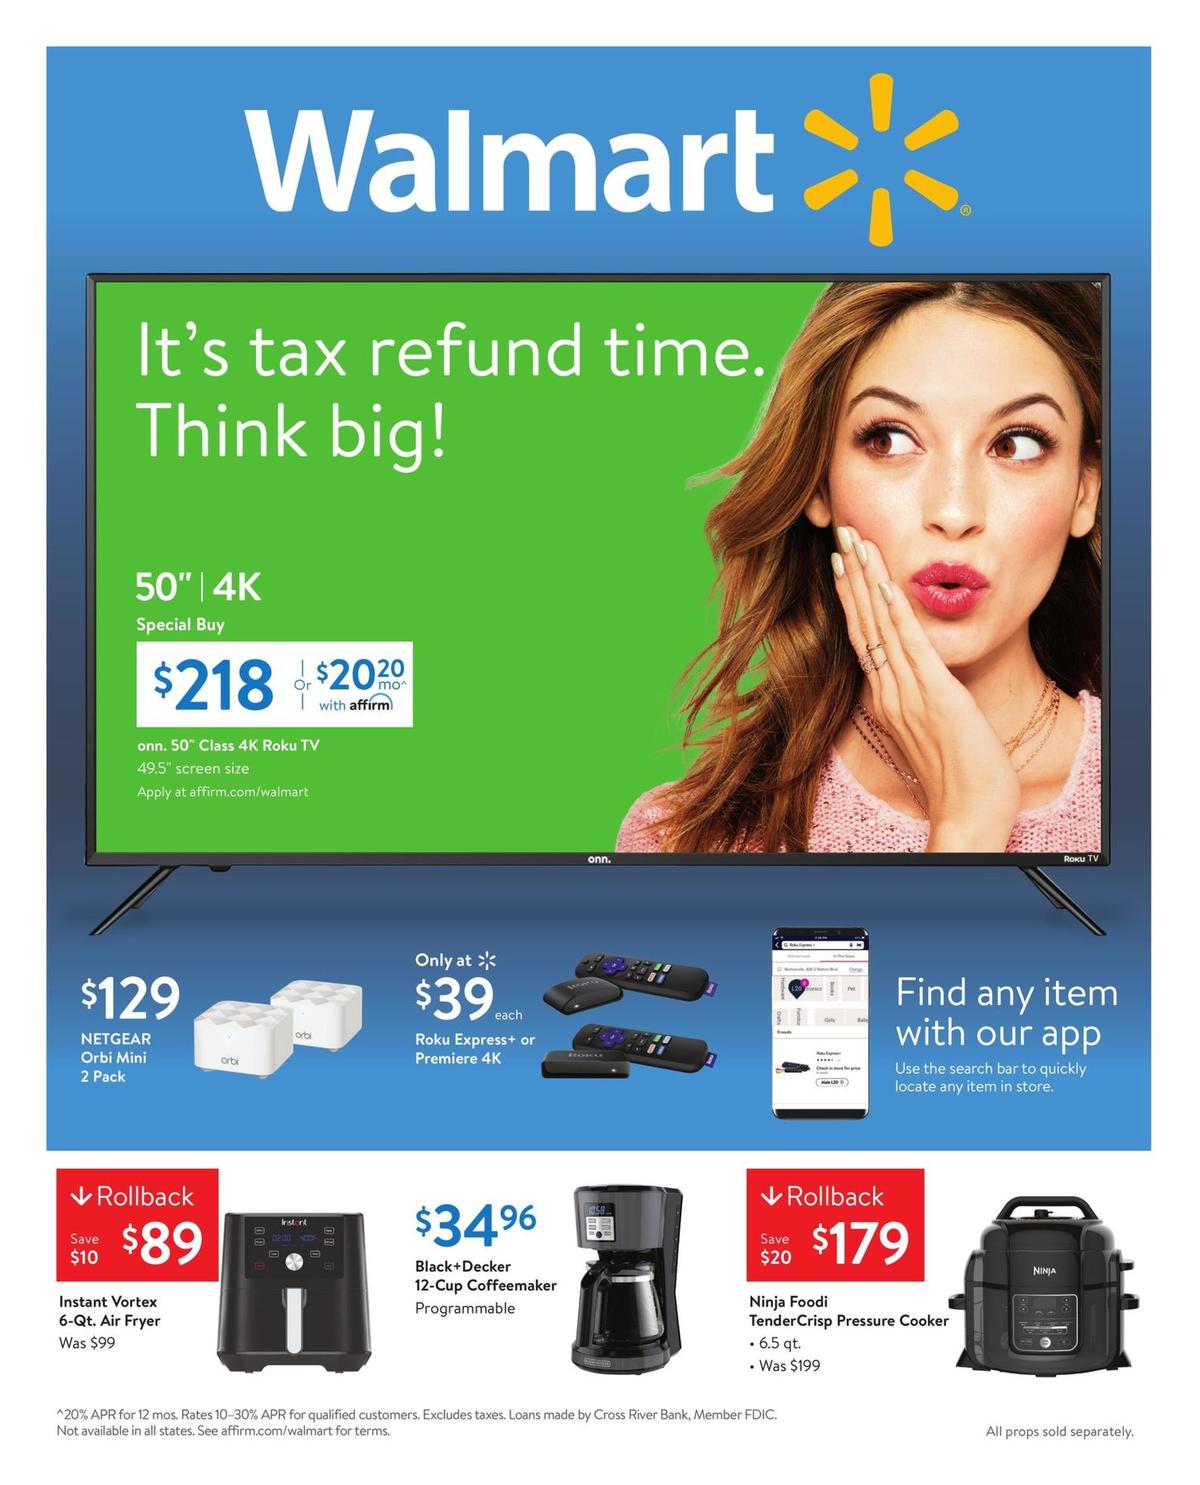 Walmart ad for the week the sims free play